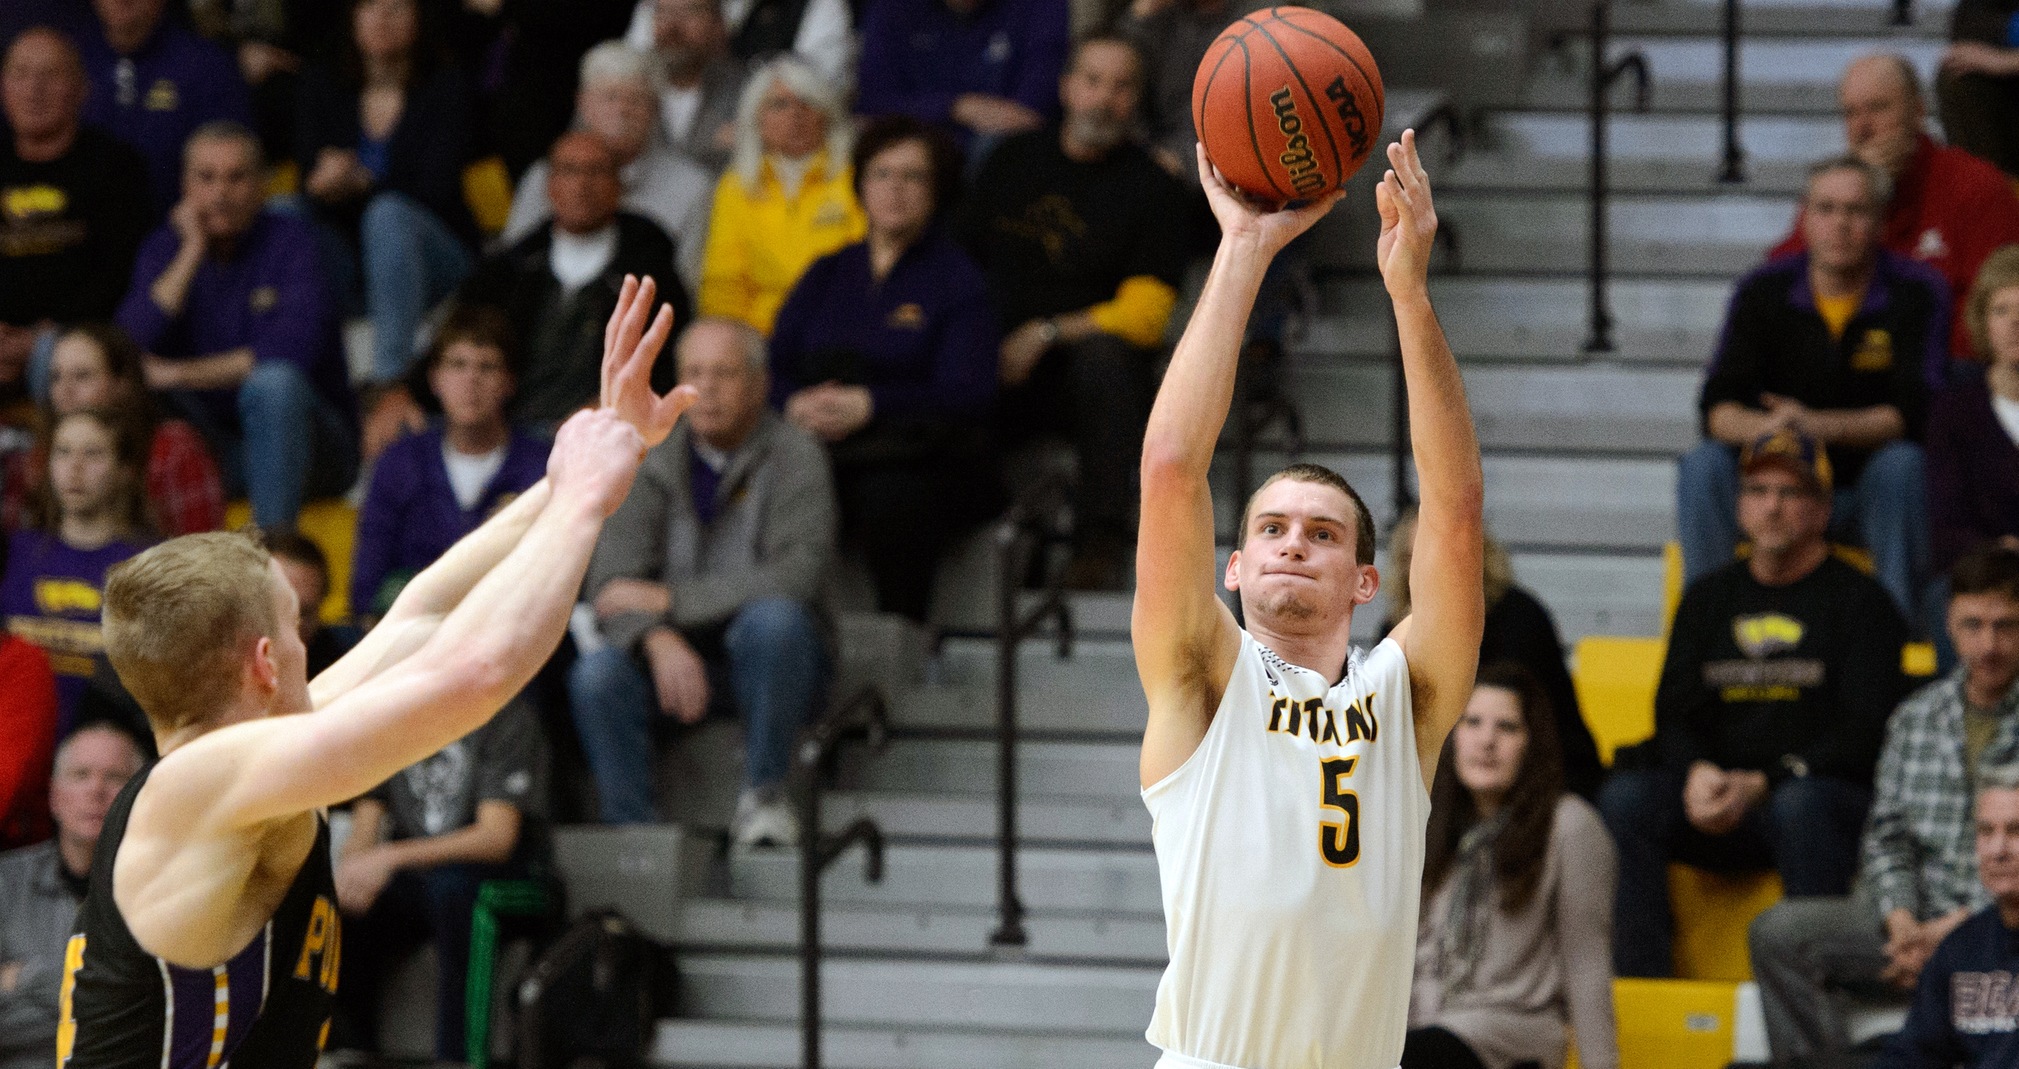 Taylor Jansen scored 12 points and grabbed four rebounds during UW-Oshkosh's win over fourth-ranked UW-River Falls.